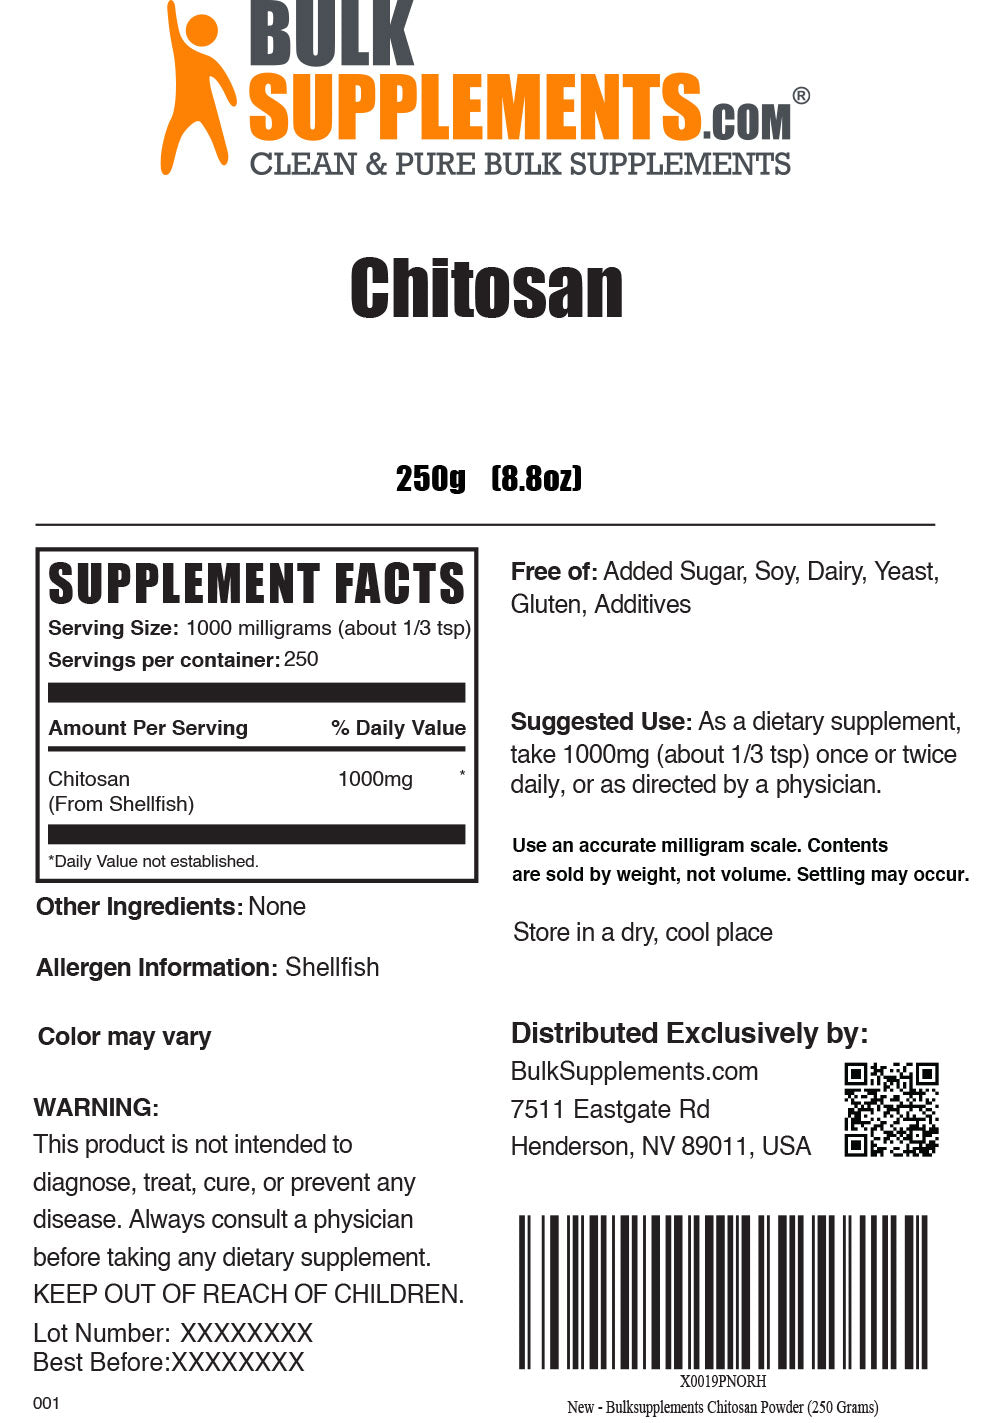 250g chitosan supplement facts label